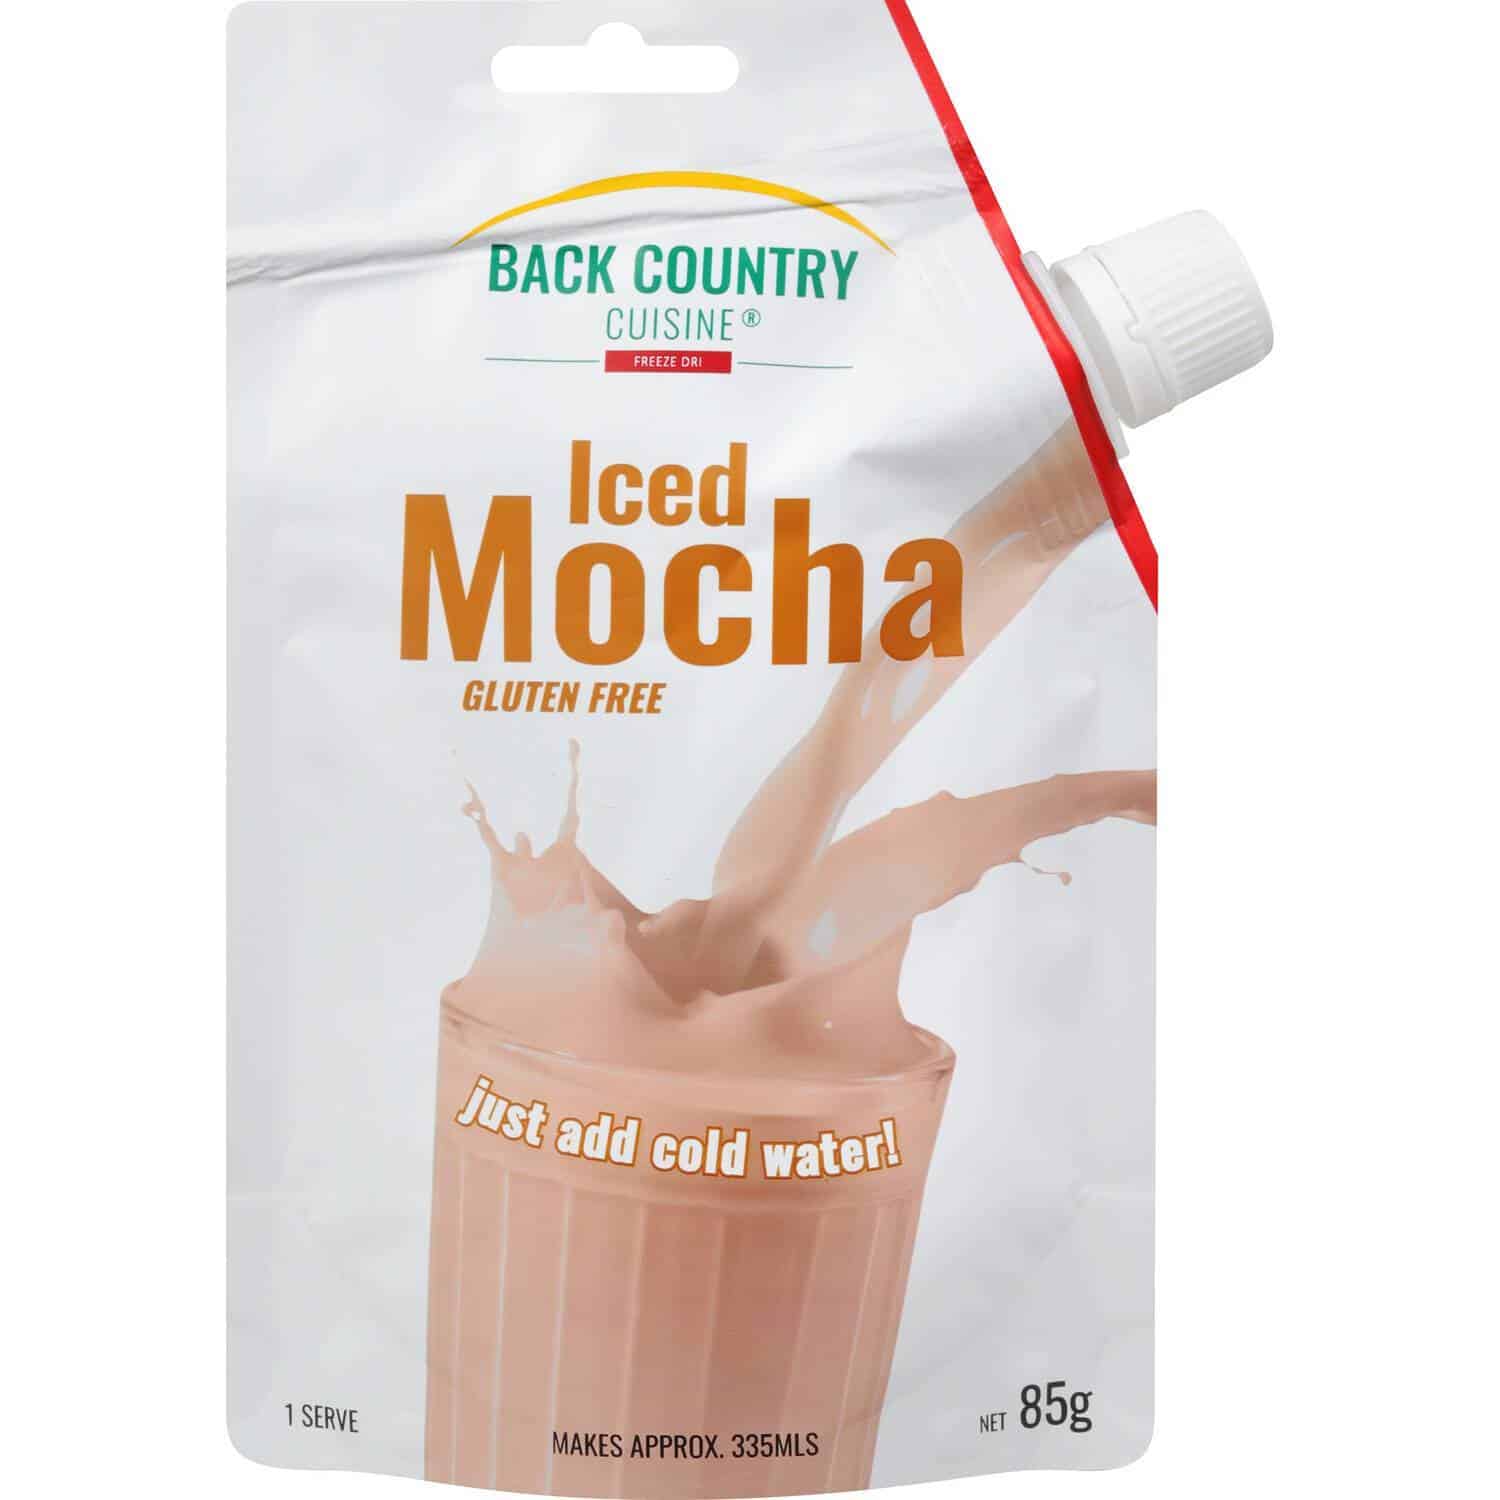 Back Country Cuisine Iced Mocha - Tramping Food and Accessories sold by Venture Outdoors NZ